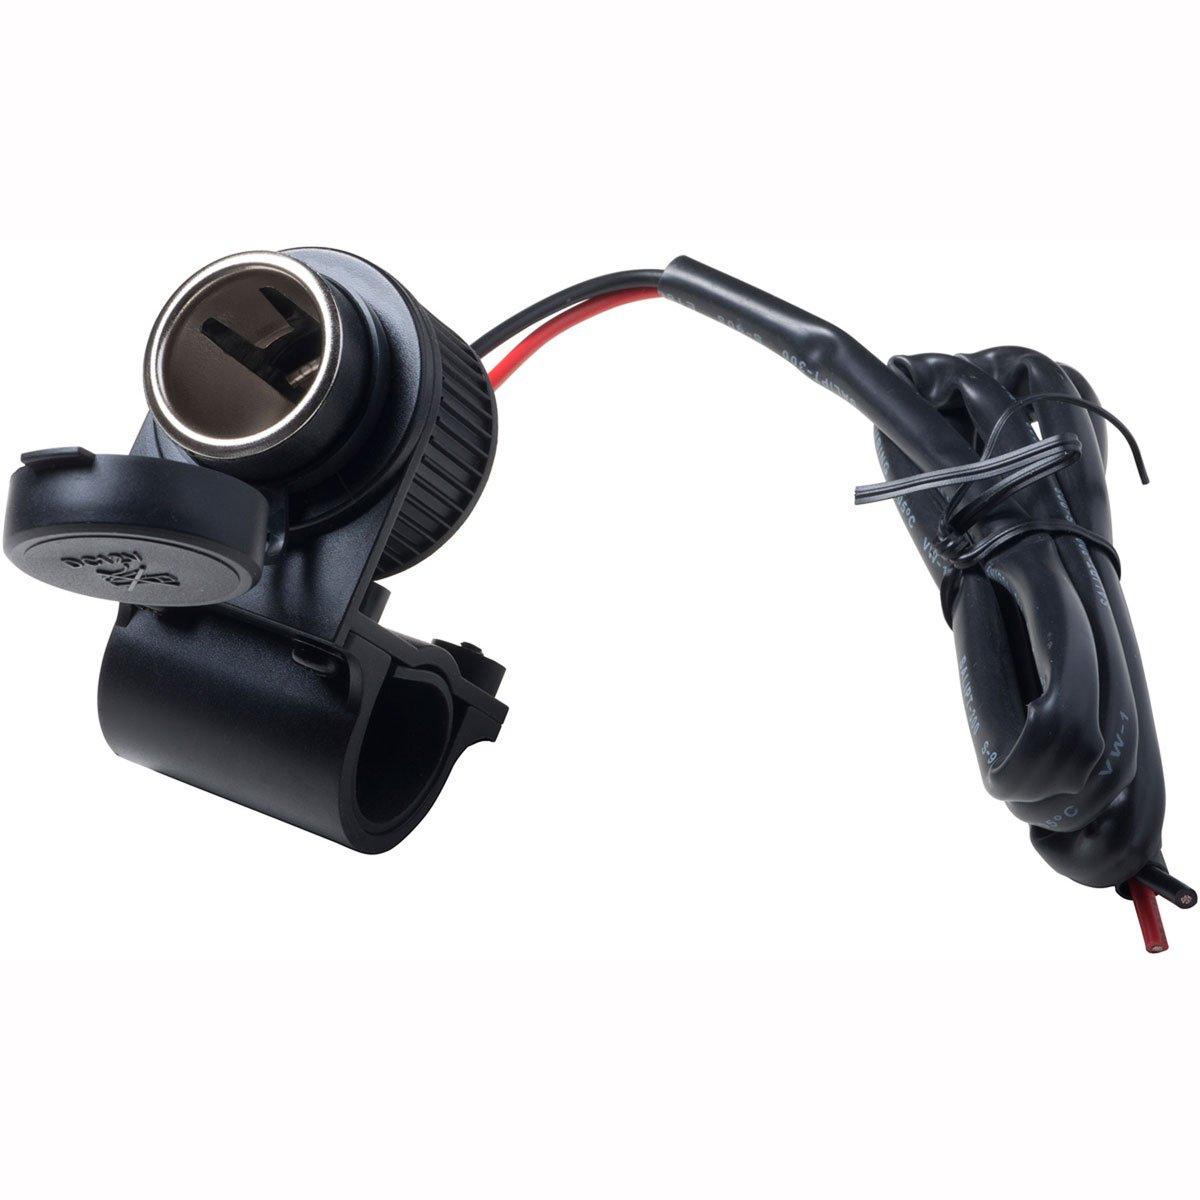 Interphone 12V Moto Adaptor Socket - Browse our range of Accessories: Headsets - getgearedshop 